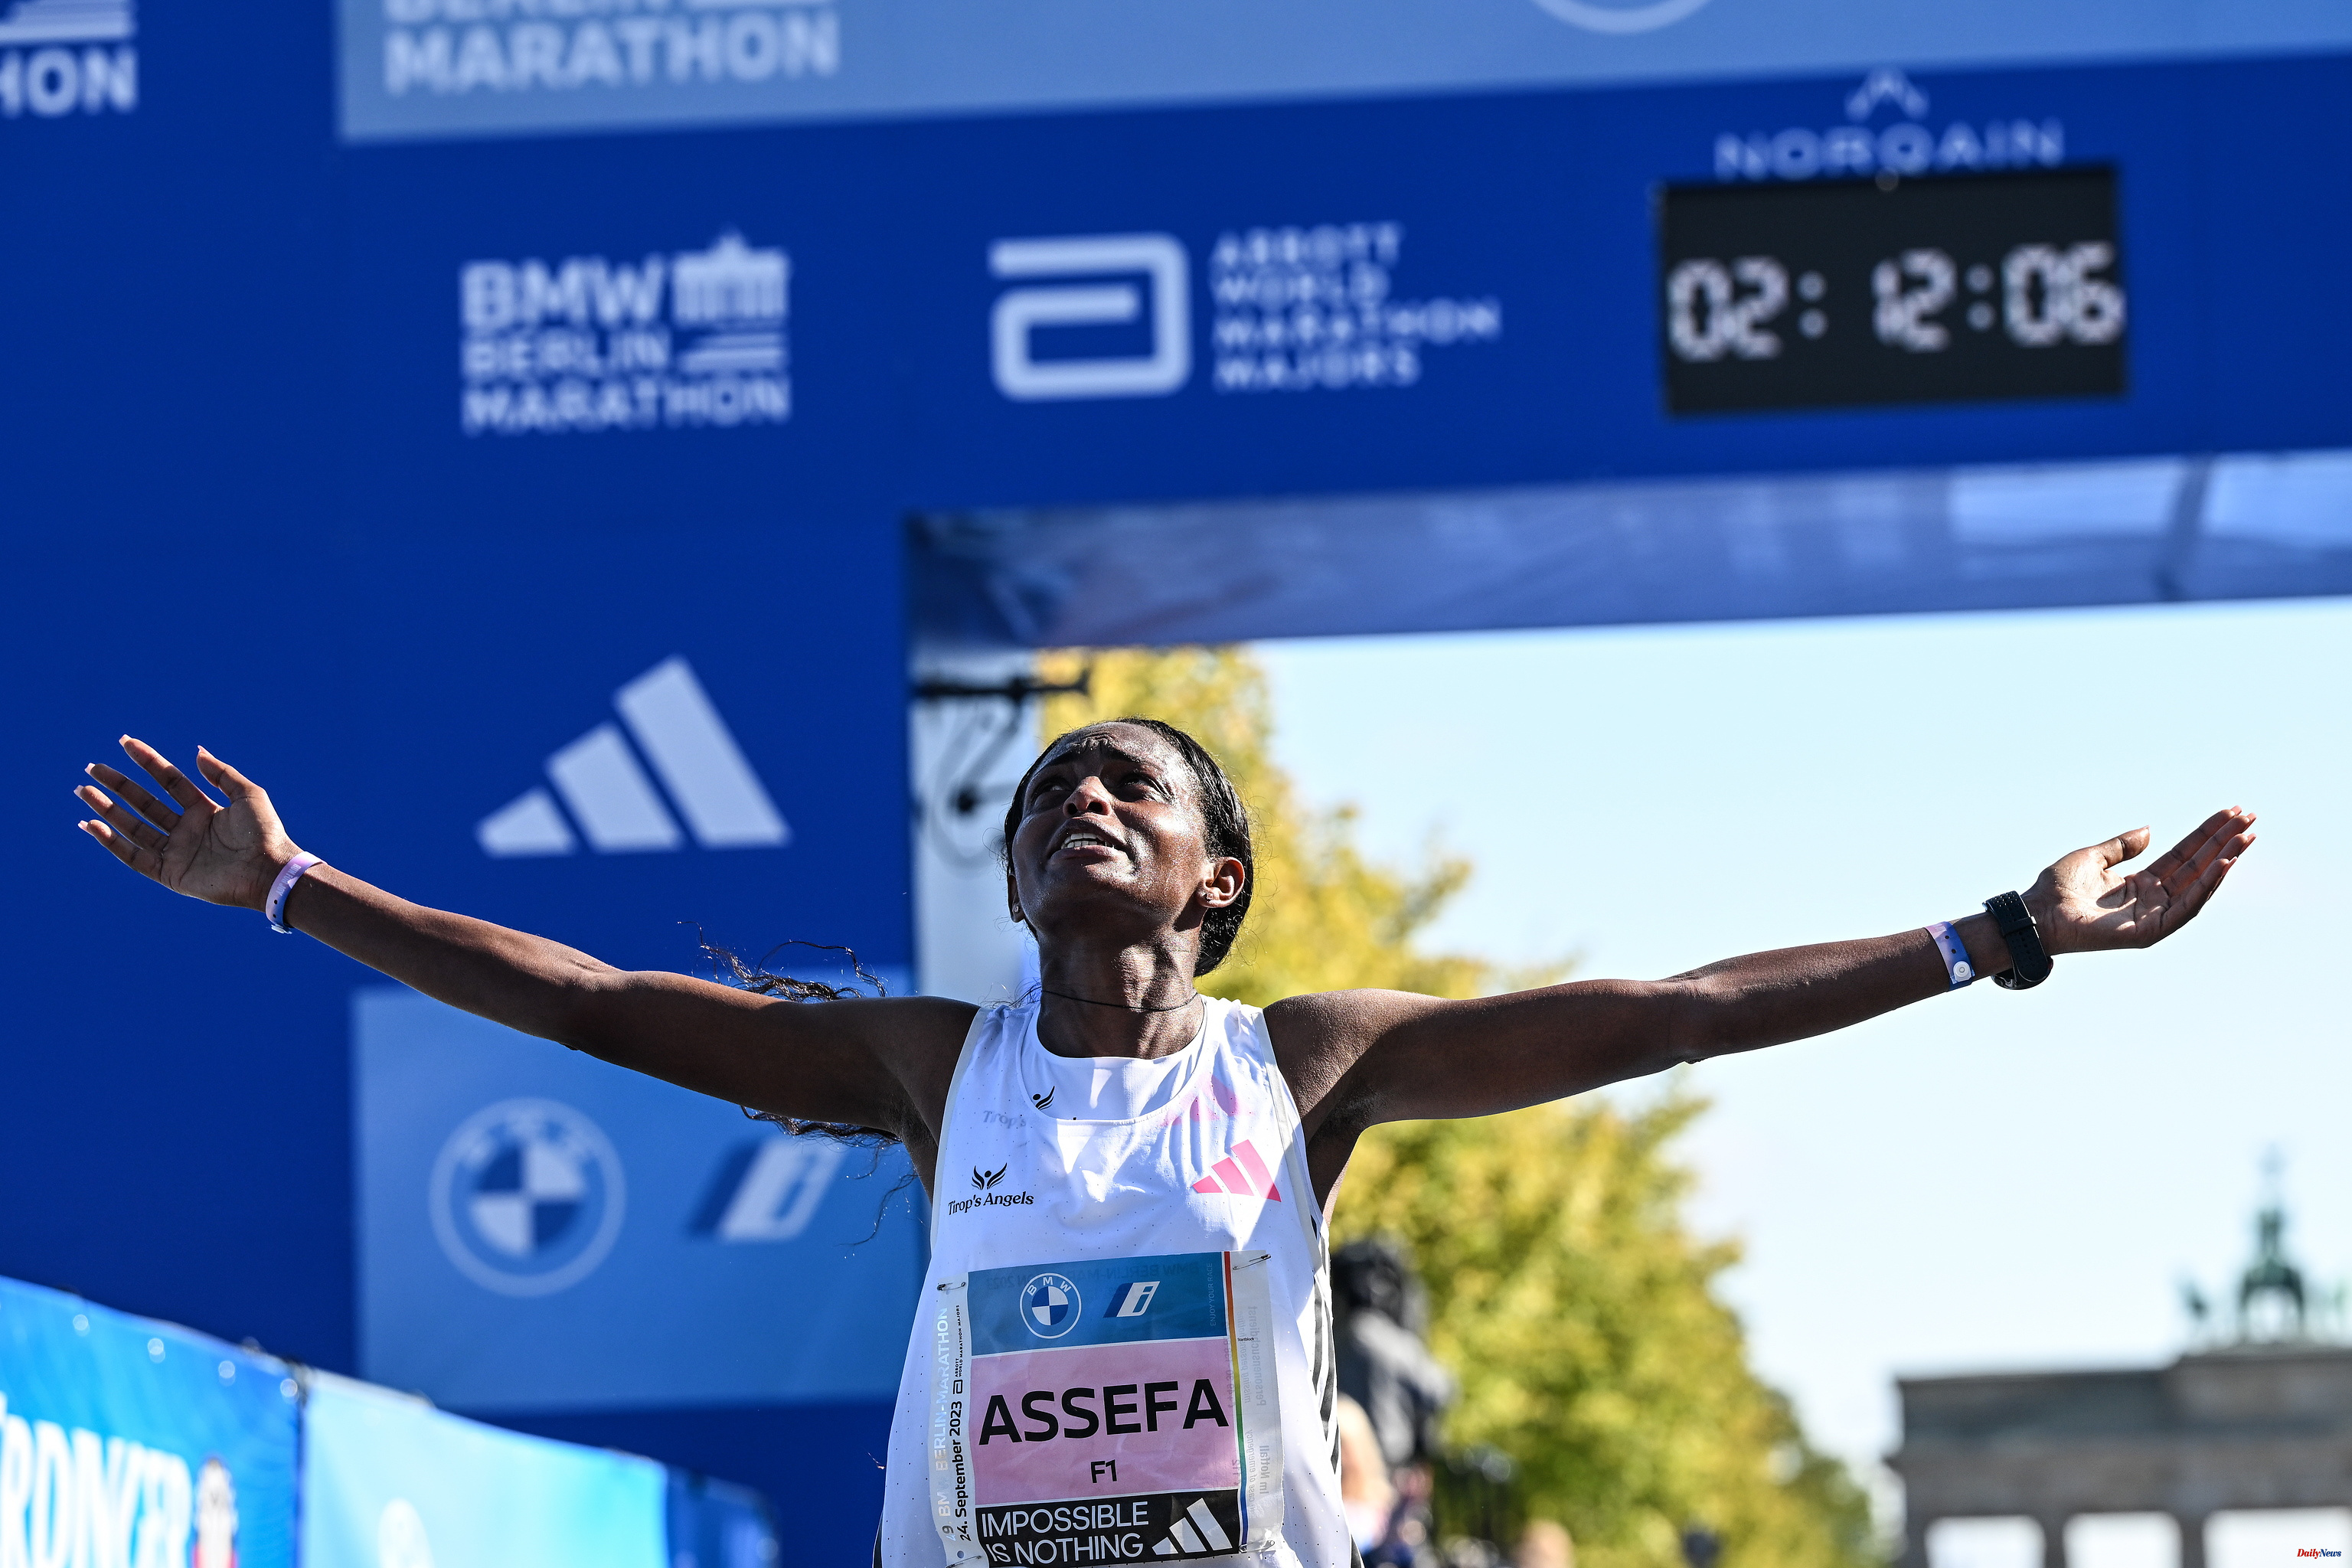 Berlin Assefa destroys the women's marathon world record with a reduction of more than two minutes